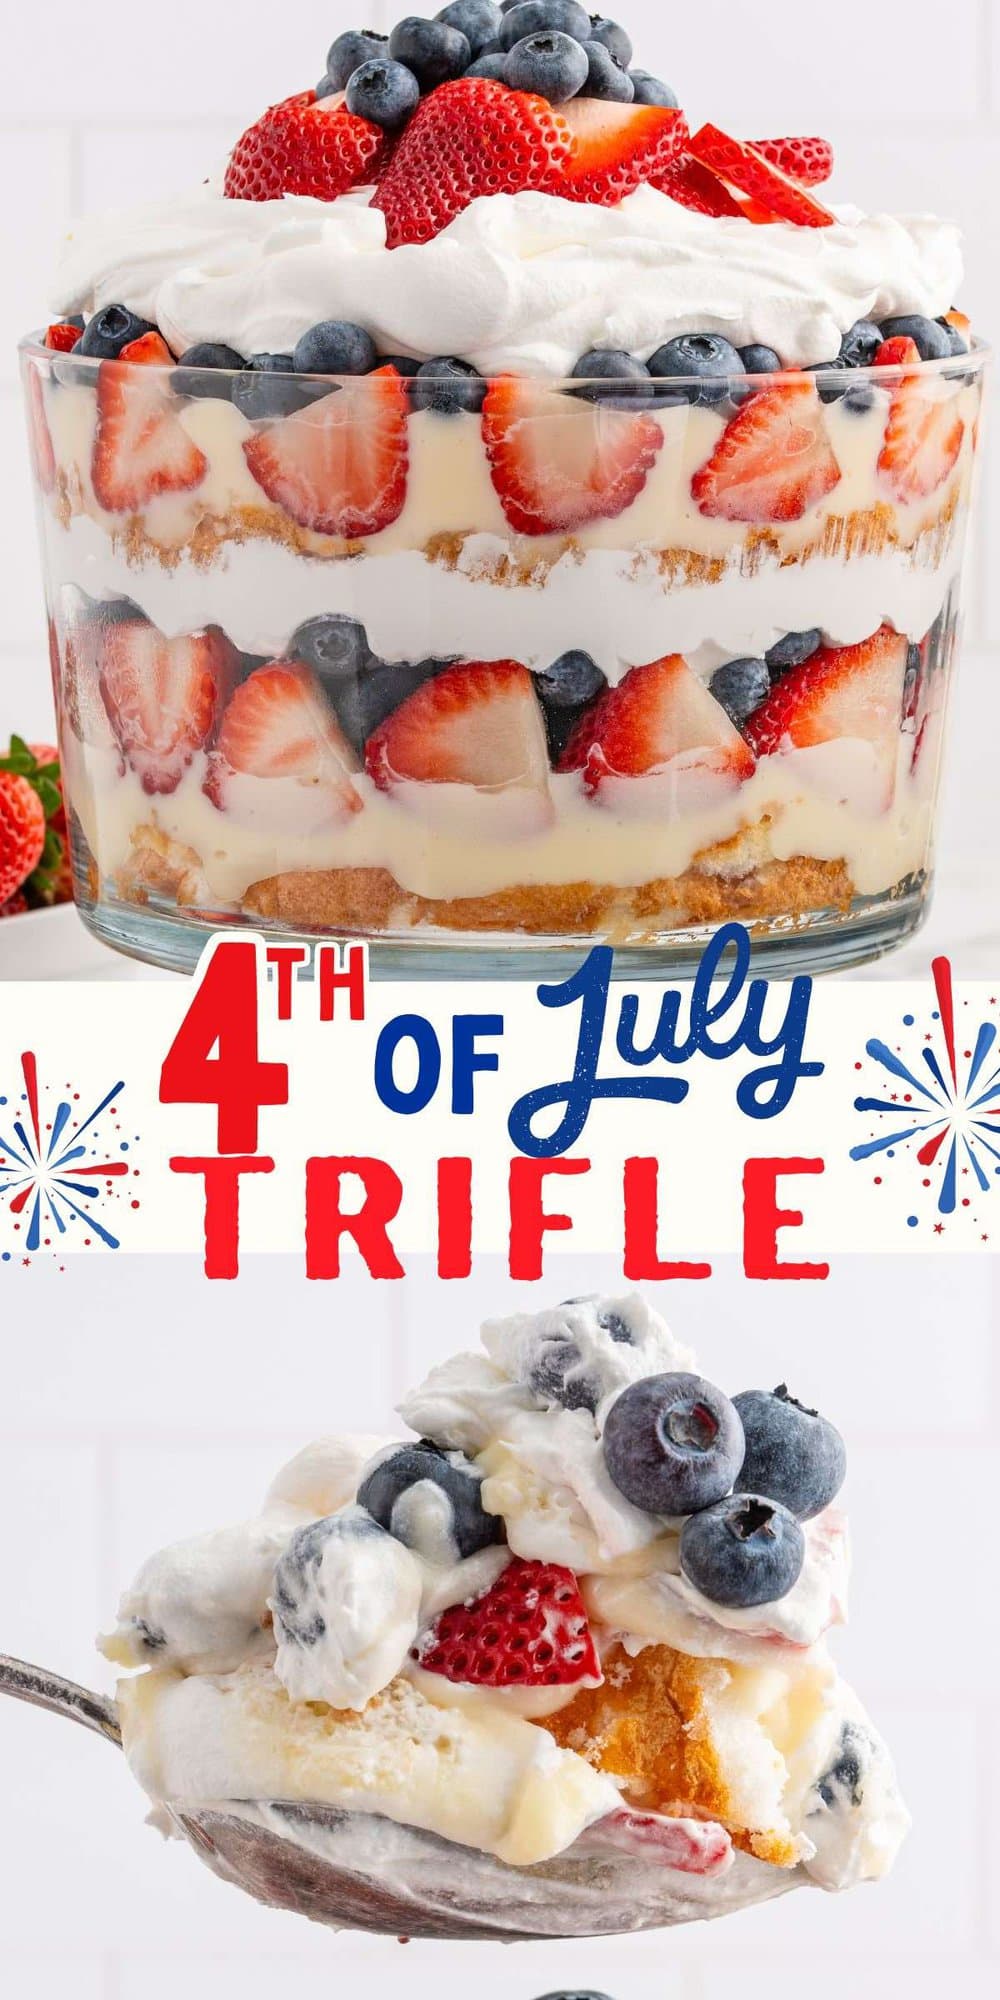 4th of july trifle pins.